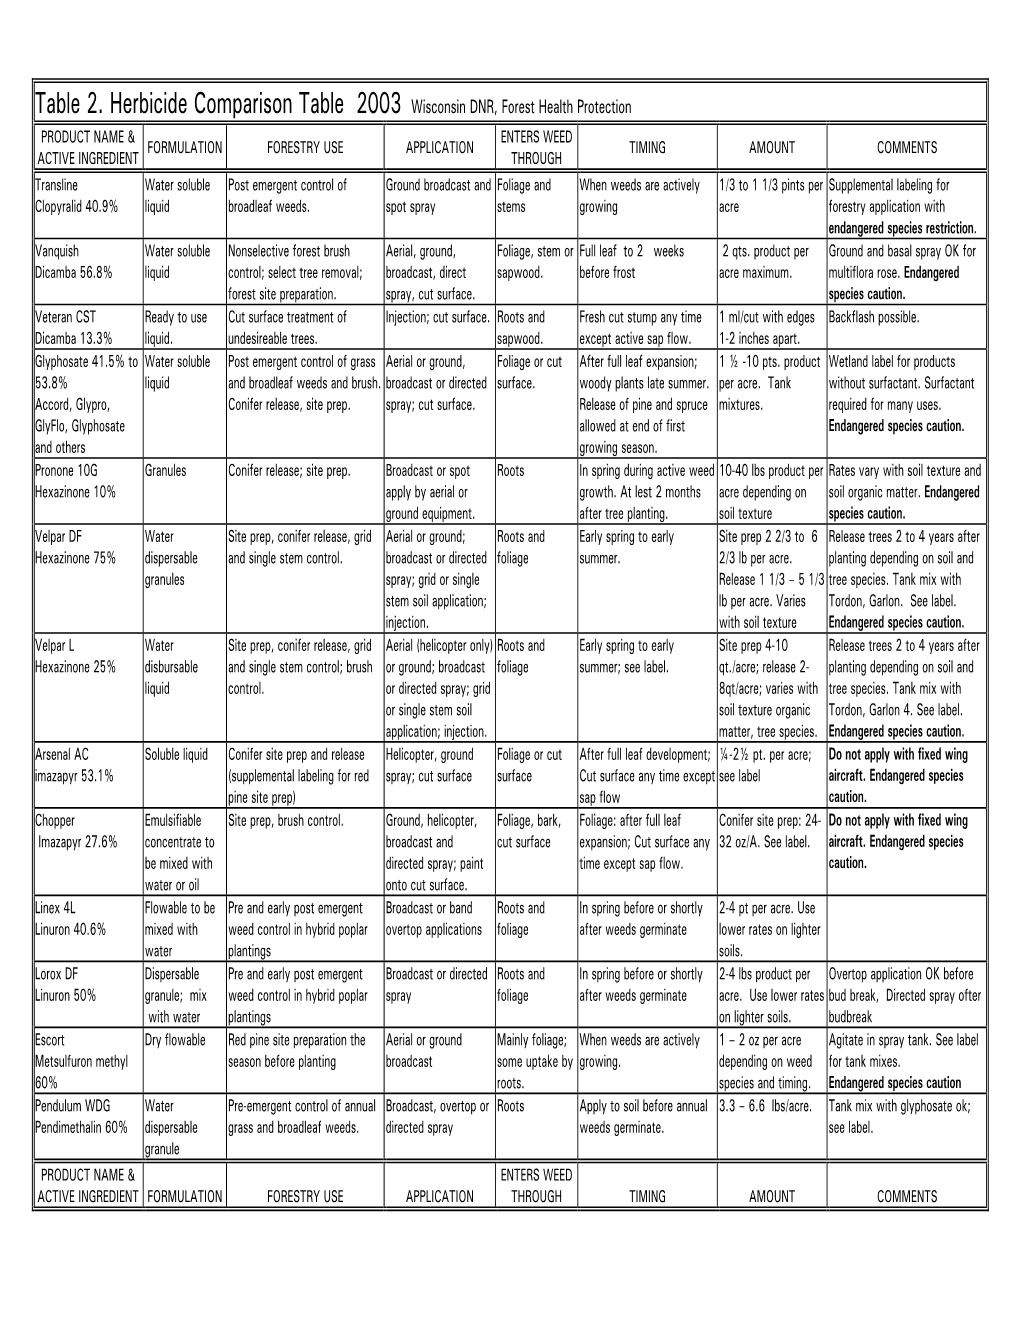 2003 Herbicide Comparison Table Wisconsin DNR, Forest Health